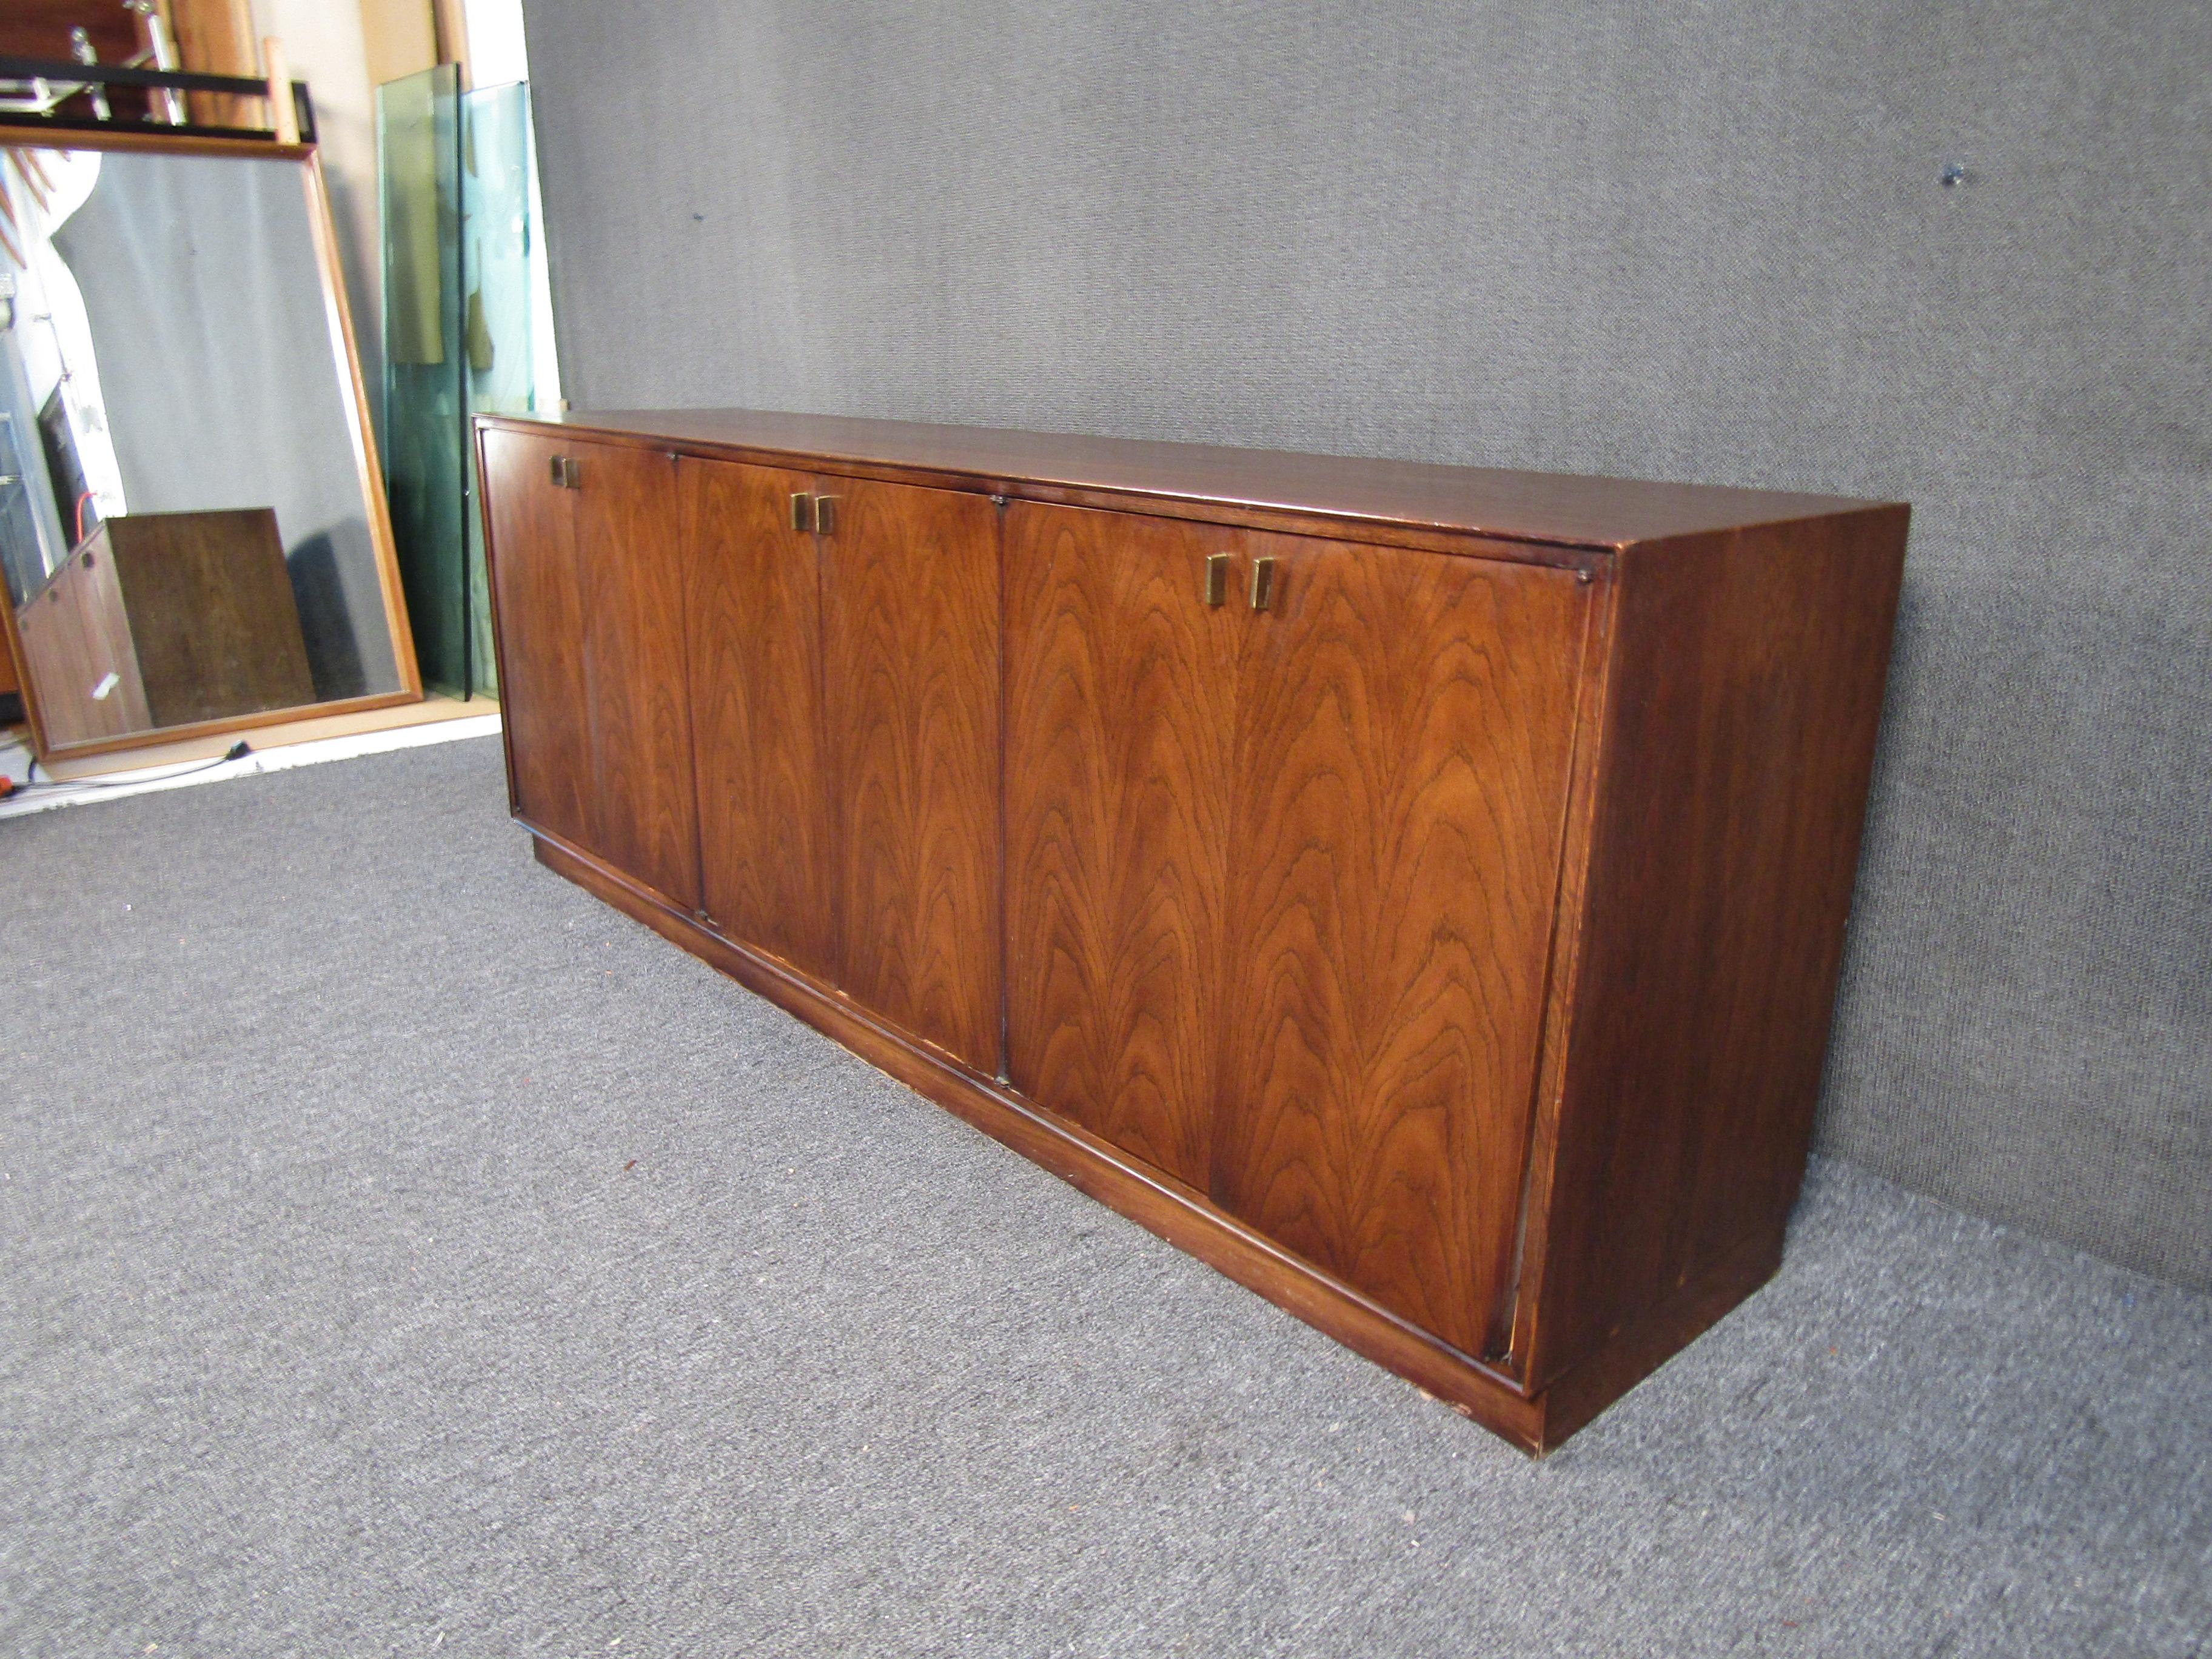 A vintage modern walnut dresser with a beautiful grain pattern. Complete with dove-tailed drawers, brass pull handles and 3 storage drawers with dividers. This piece is sure to look great in any home/office setting. 

(Please confirm pickup